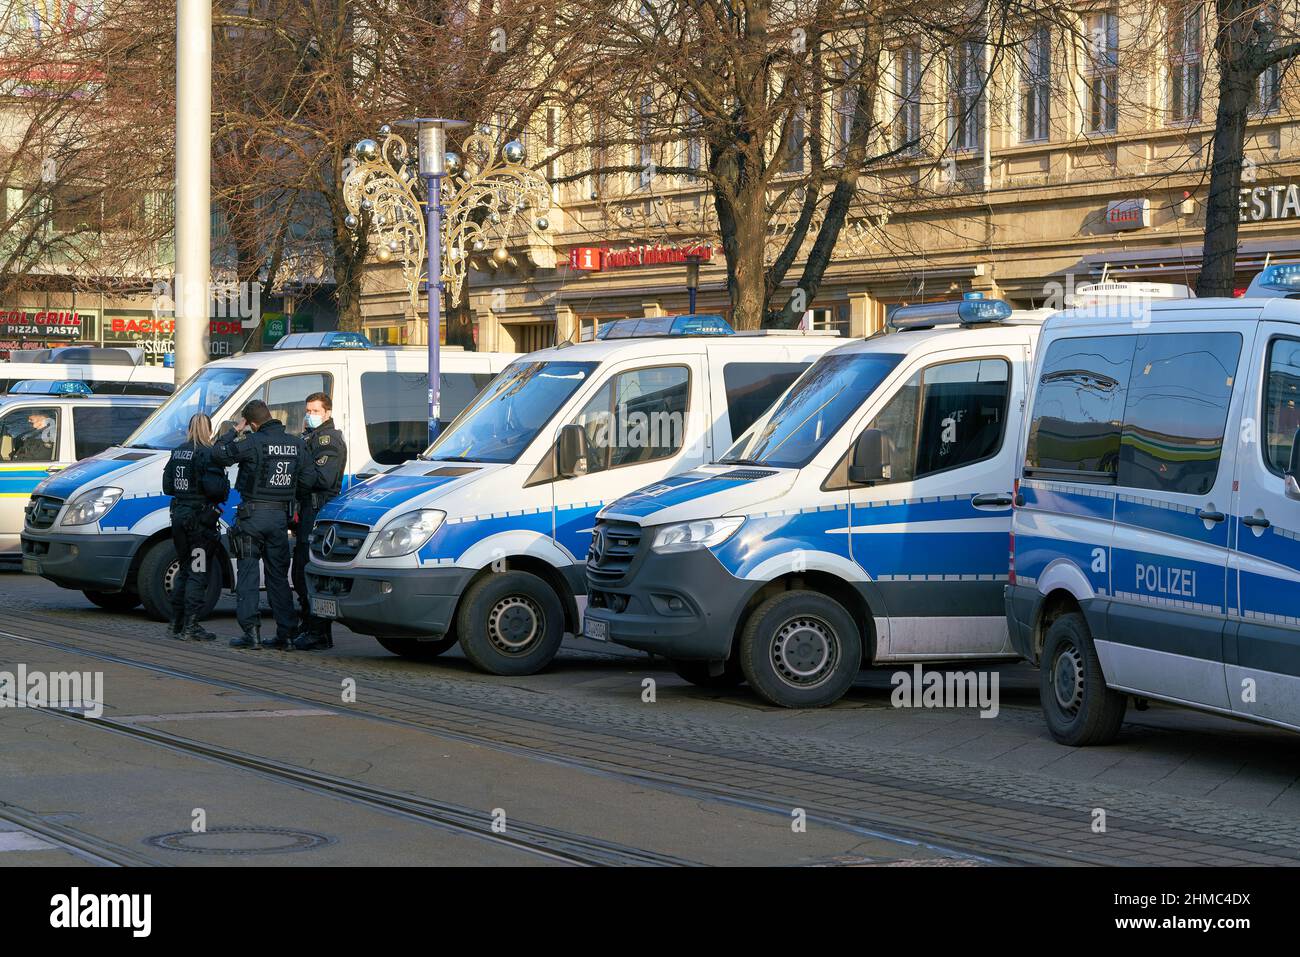 Police security forces during protests by opponents of the Corona measures and compulsory vaccination in downtown Magdeburg in Germany Stock Photo